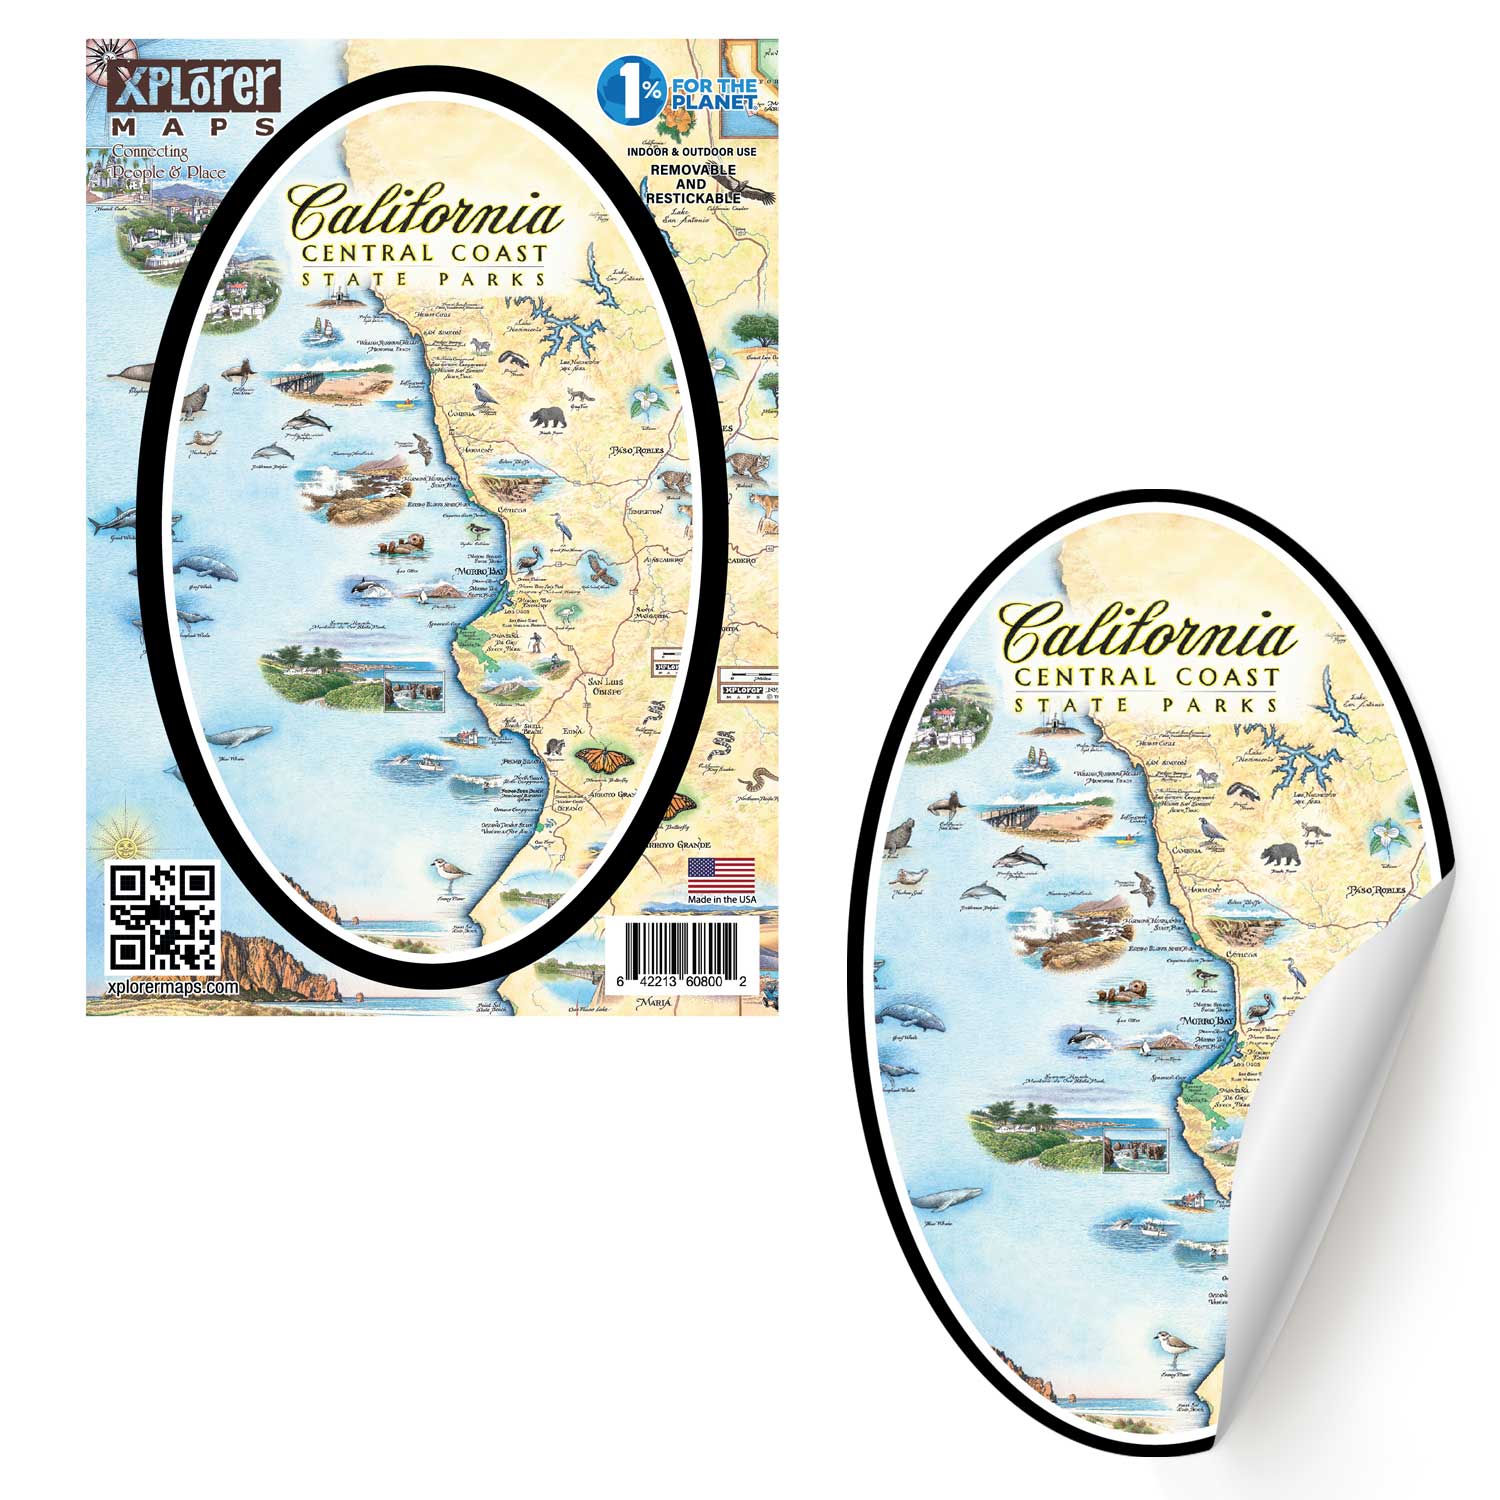 California Central Coast State Parks Map sticker in earth tones. Featuring wildlife viewing is abundant with sea life, birding, and terrestrial creatures. Cultural history is rich in the area with the fame of Hearst Castle, Ranchers of Montana De Oro, Dunites of Oceano Dunes, and Native people that have lived on this land for thousands of years from San Francisco to Los Angeles.